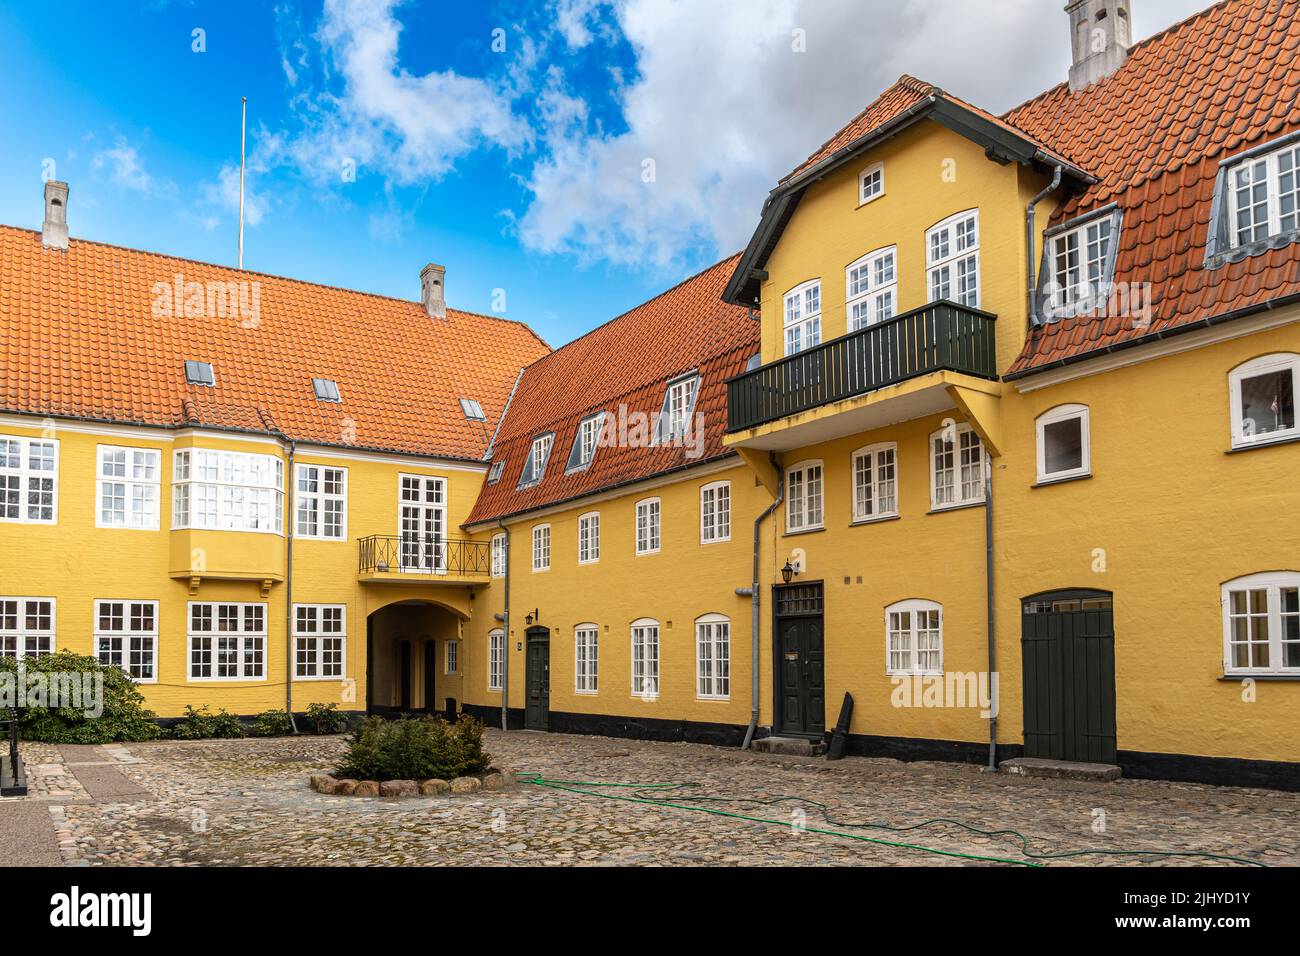 Characteristic internal courtyard surrounded by houses and warehouses. Assens, Denmark, Europe Stock Photo